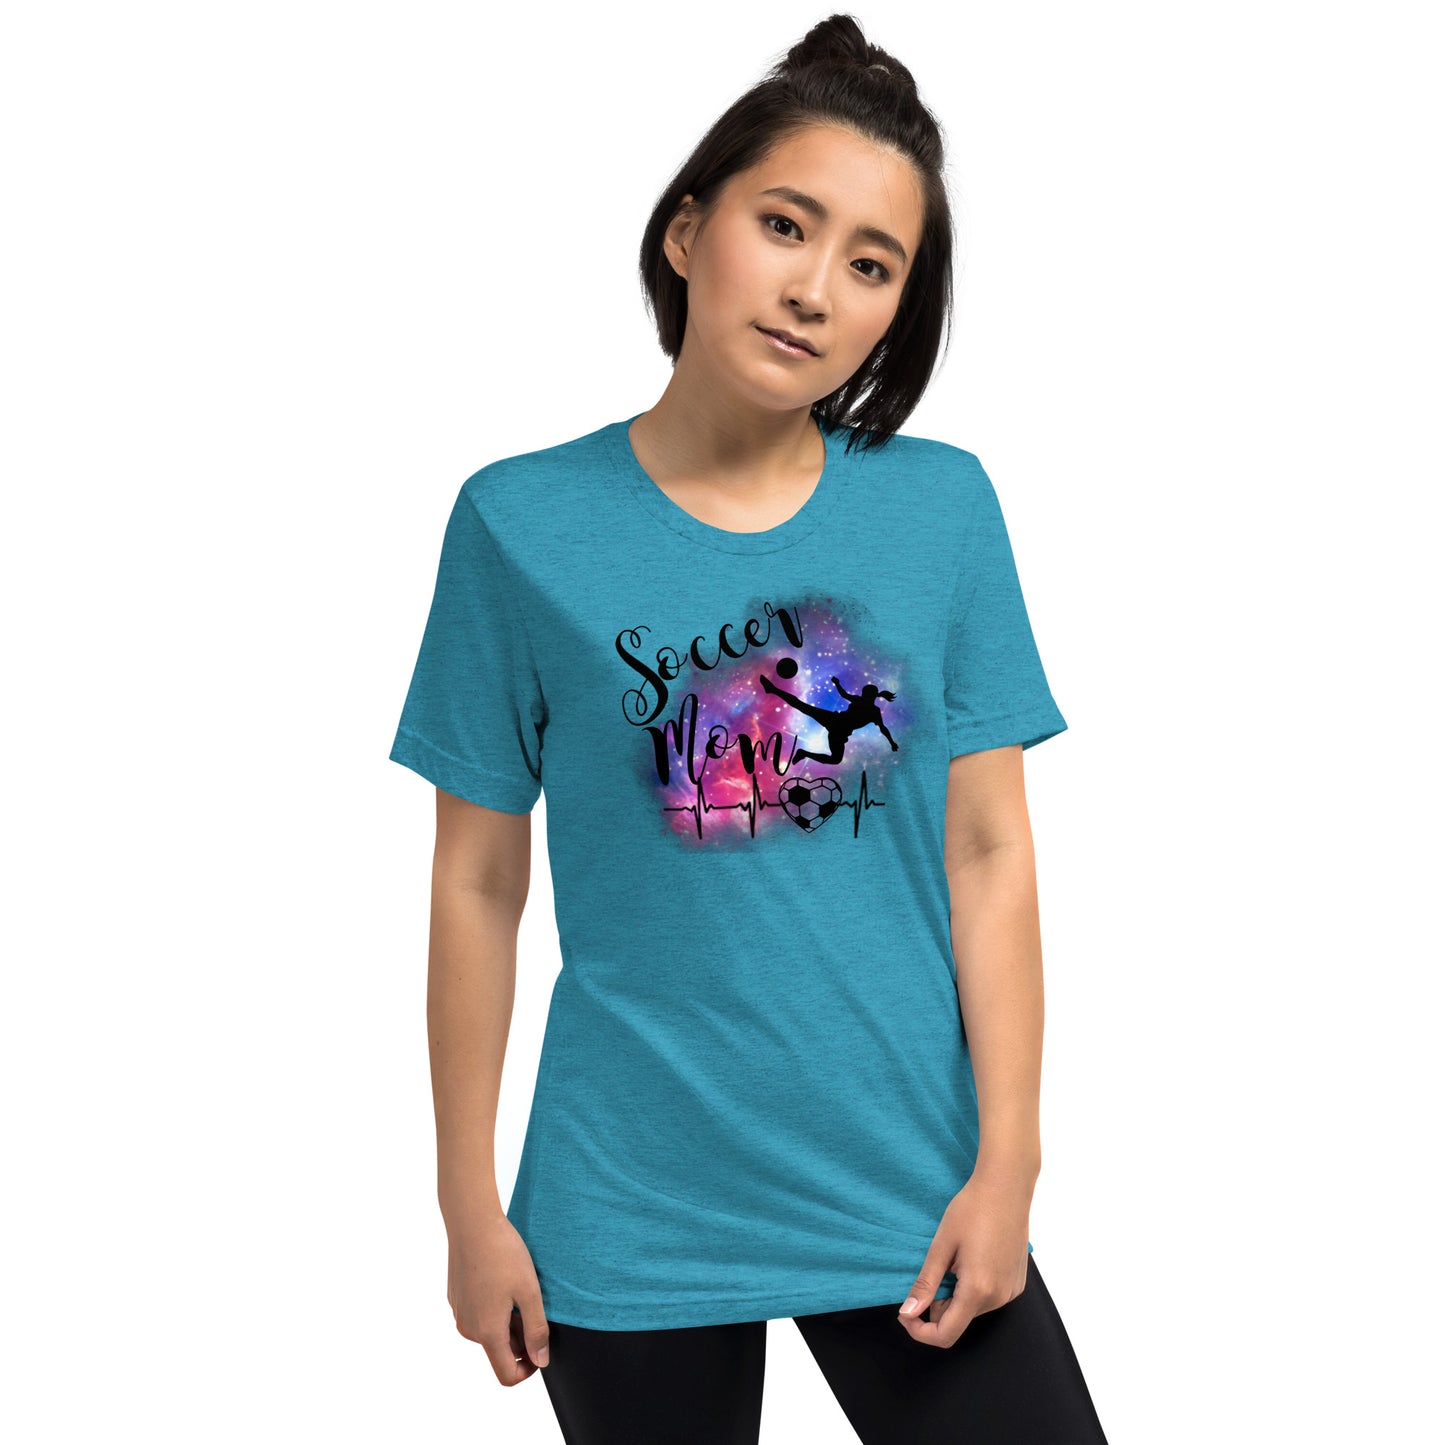 Soccer Mom Graphic Tee